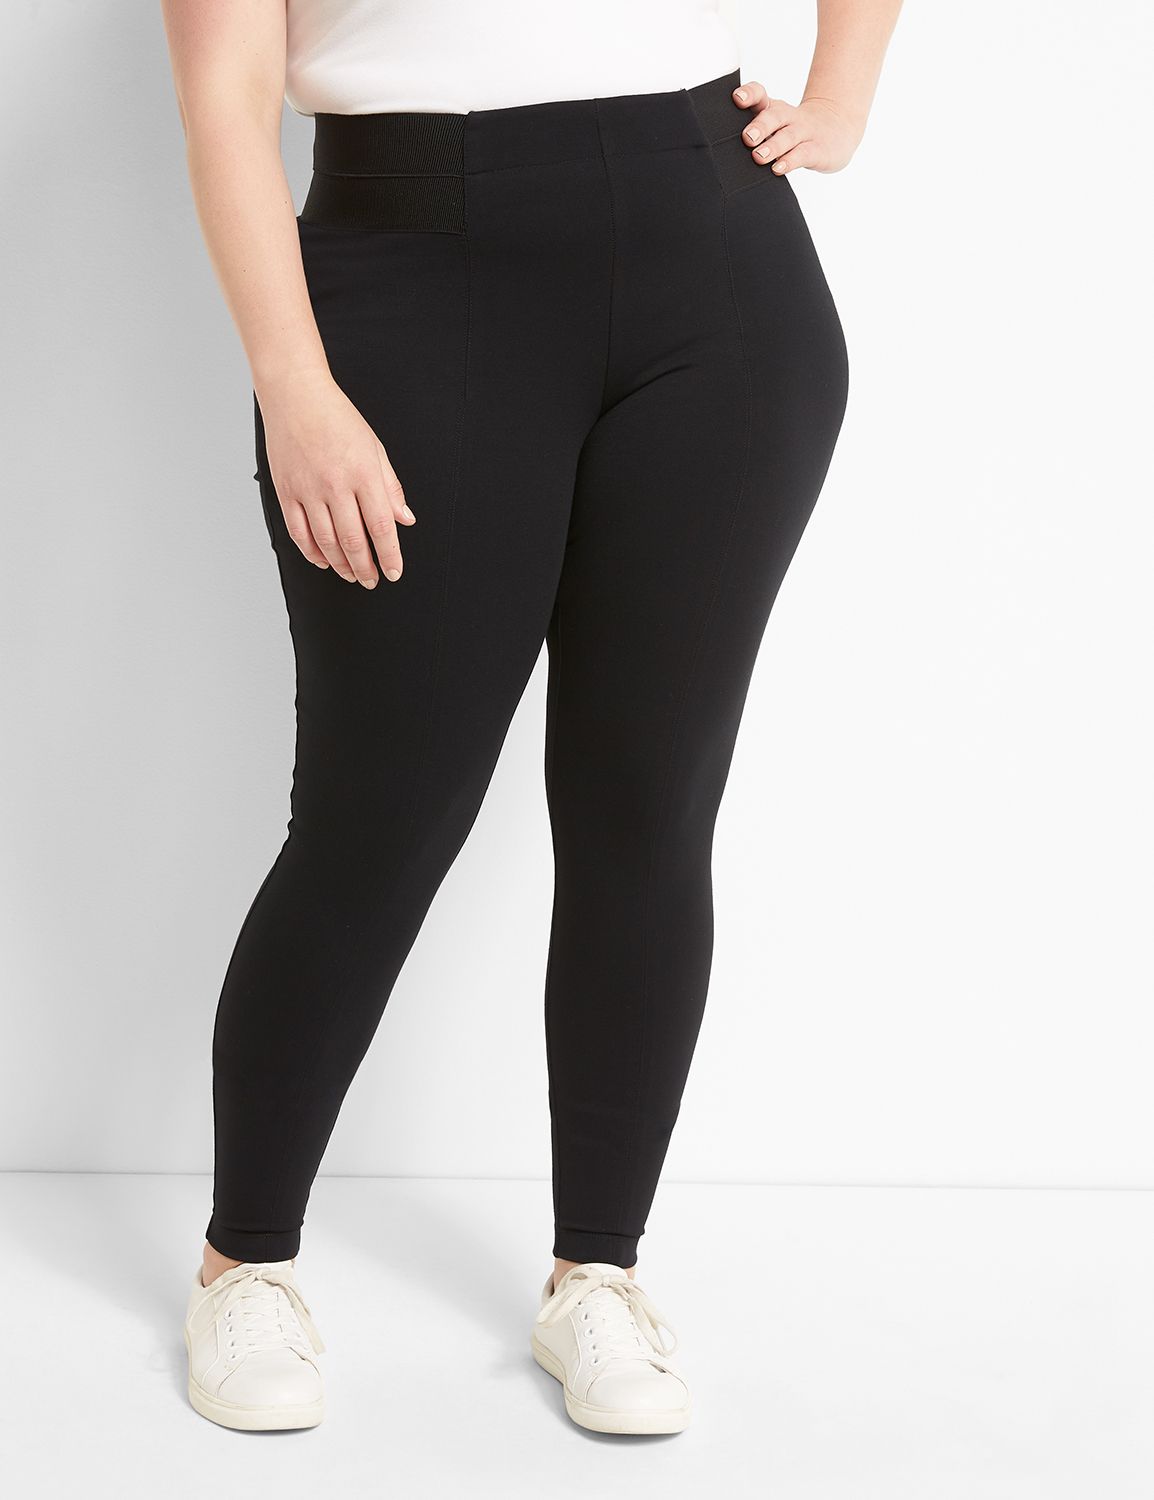 Satina High Waisted Leggings with Pockets Super Soft | Reg & Plus Size (One  Size, Black)